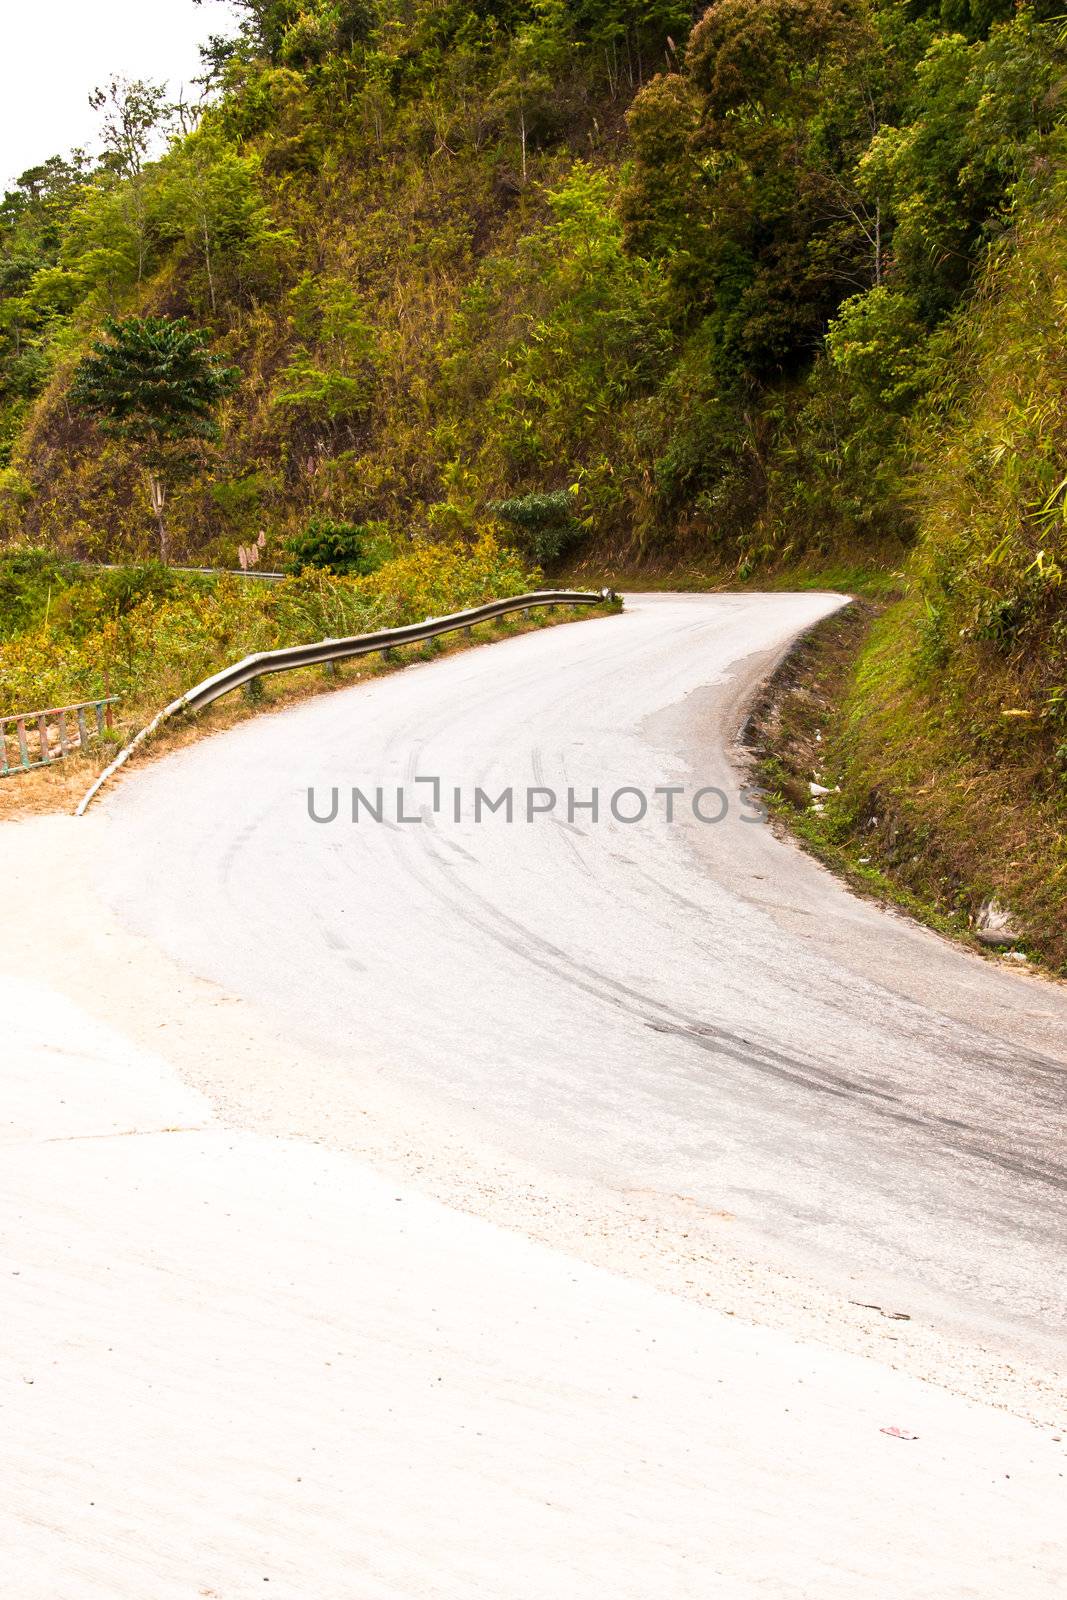 A road into Valley in the suburbs in Laos.